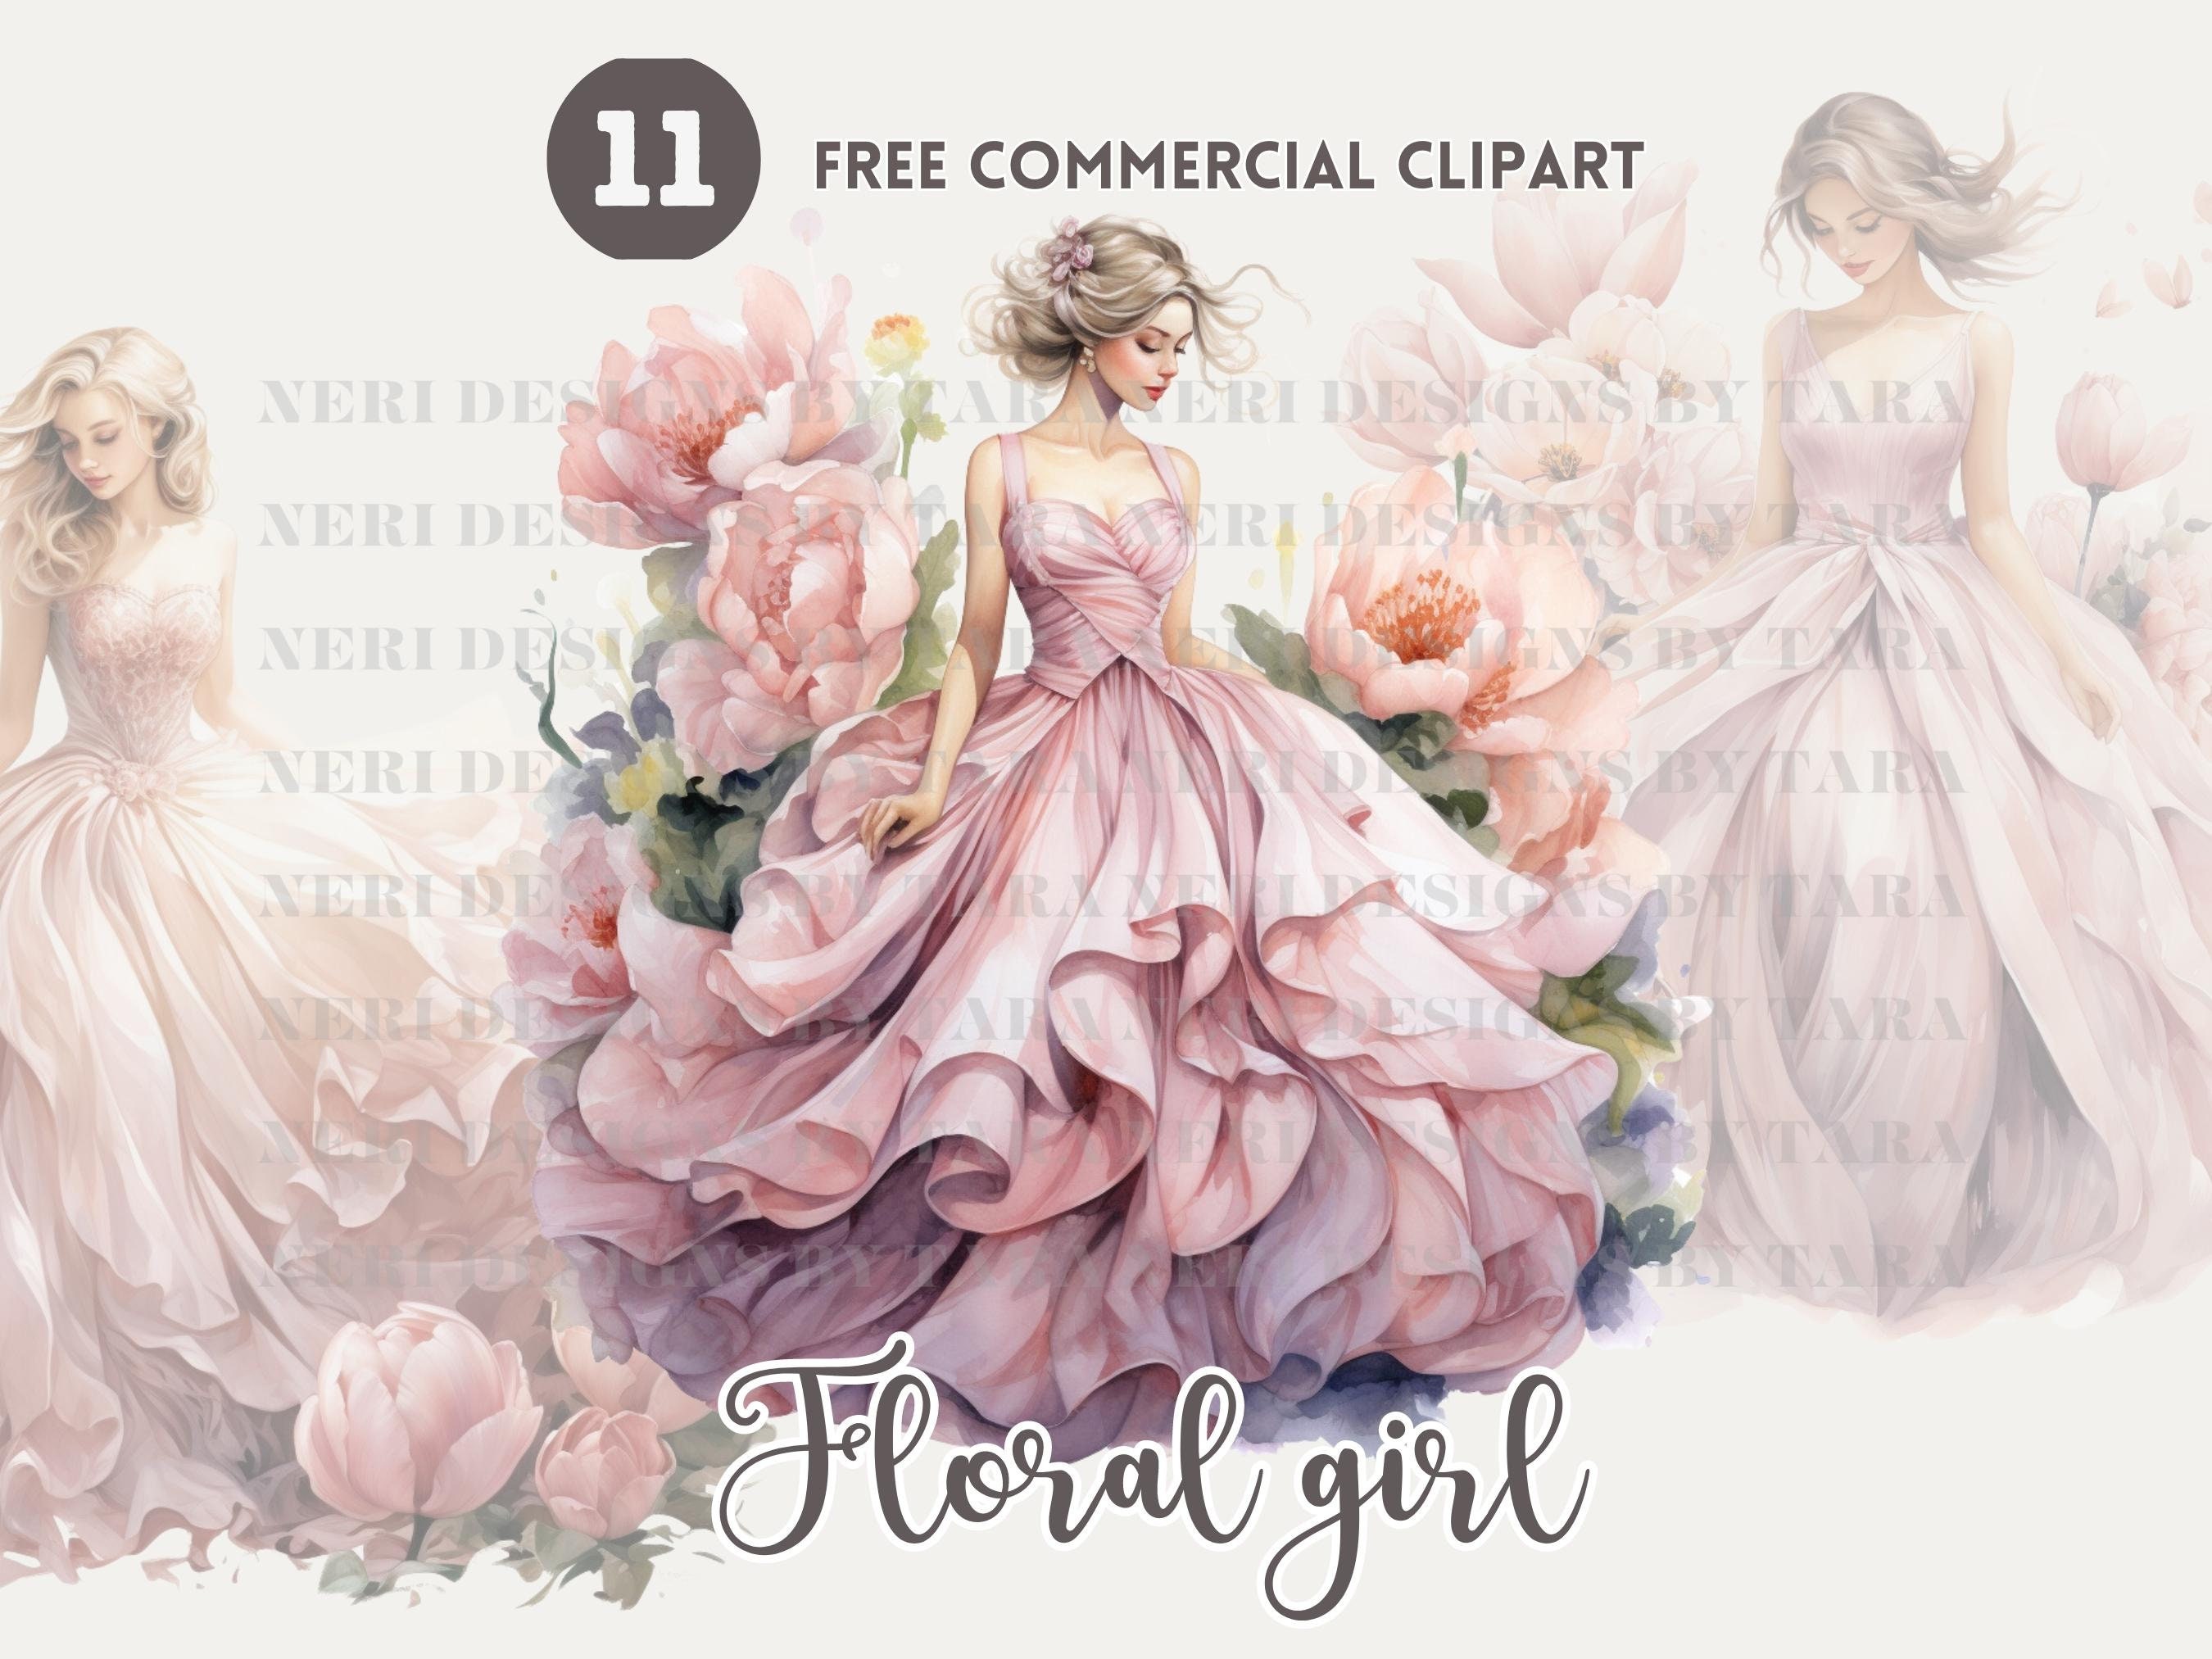 Application of Craft Paper. Sketch the Silhouette of Beautiful Girls in a  Ball Gown Stock Illustration - Illustration of clip, attractive: 135146102